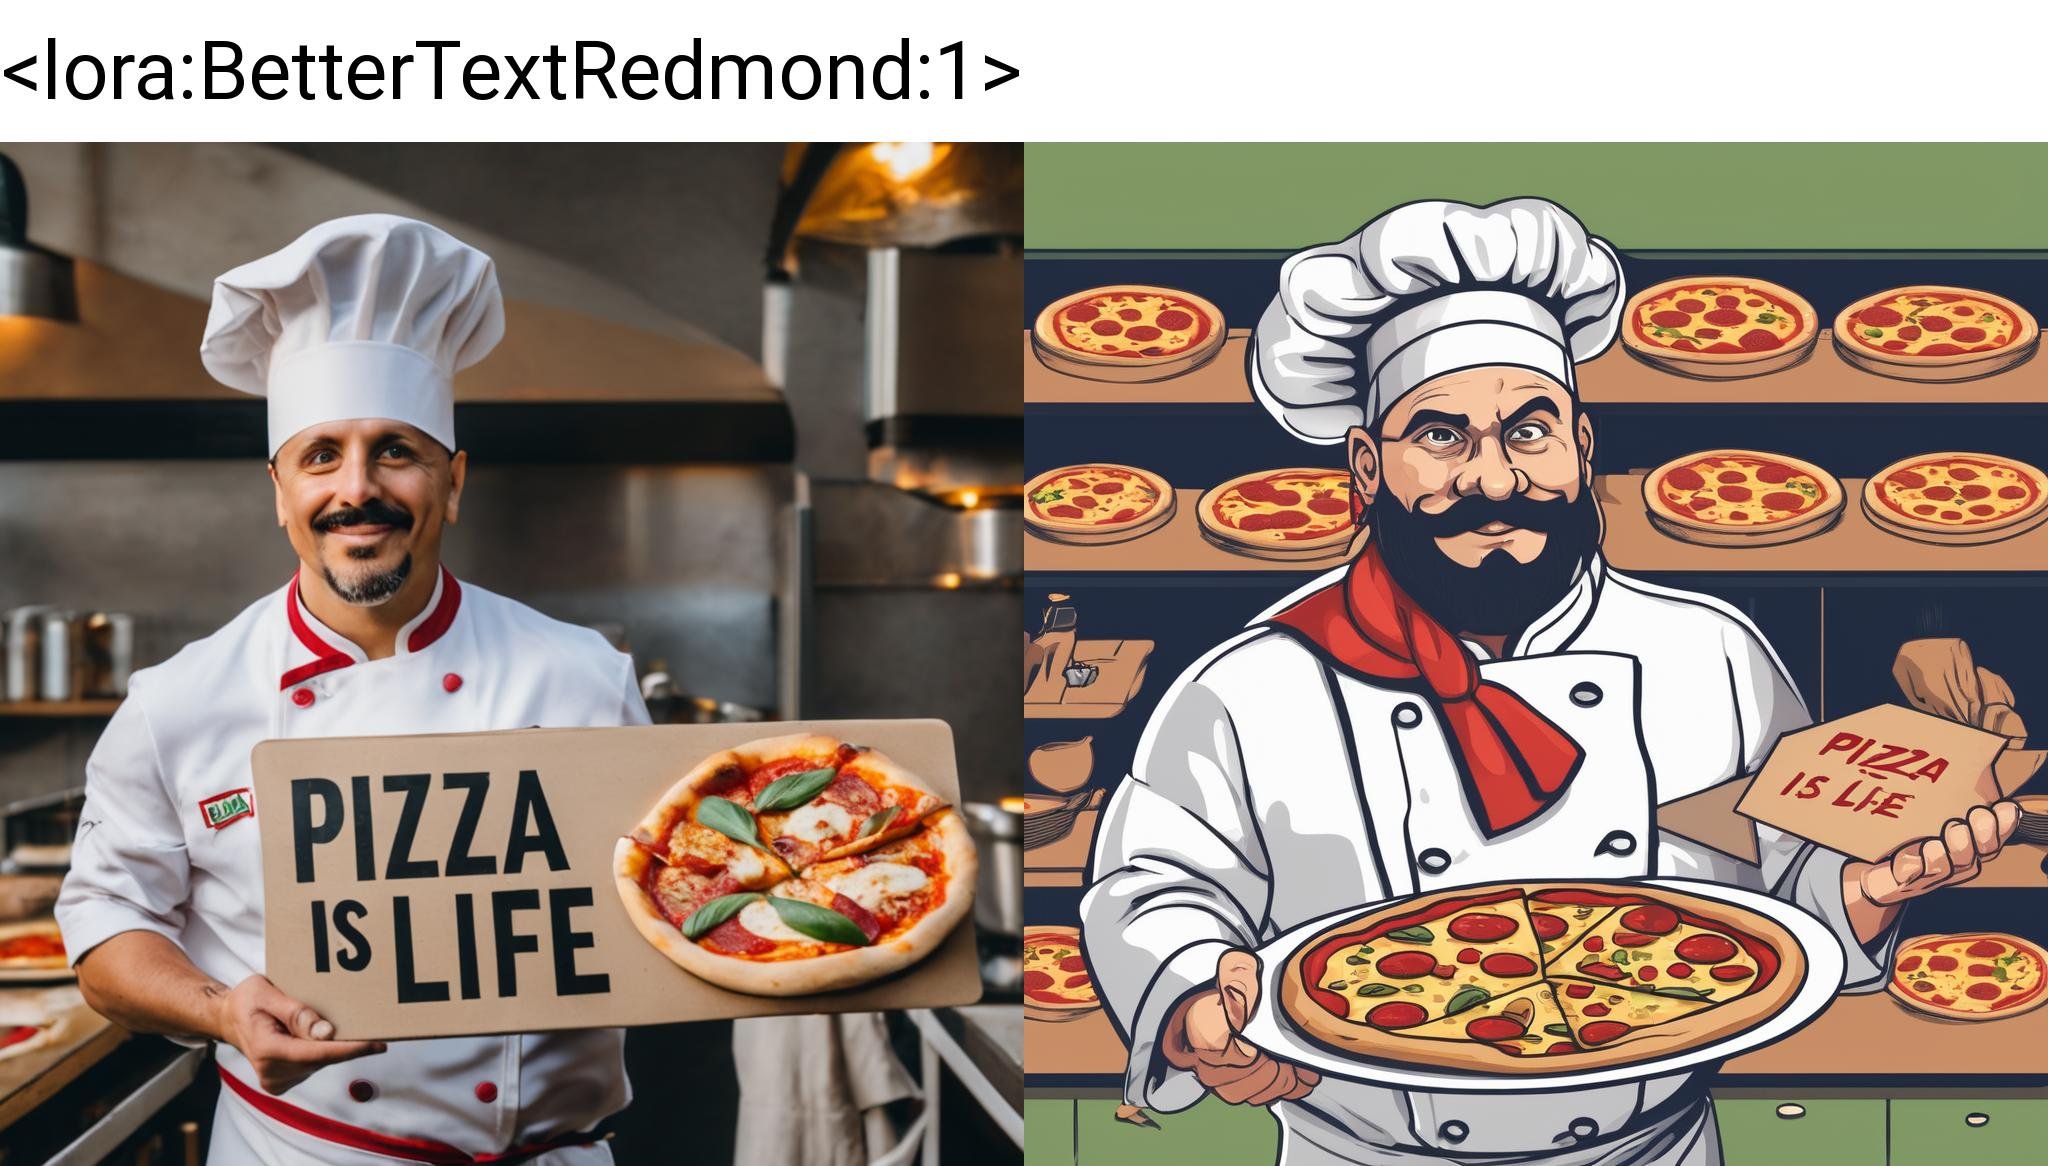 A italian chef holding a sign that say "PIZZA IS LIF", "PIZZA IS LIFE" <lora:BetterTextRedmond:1>